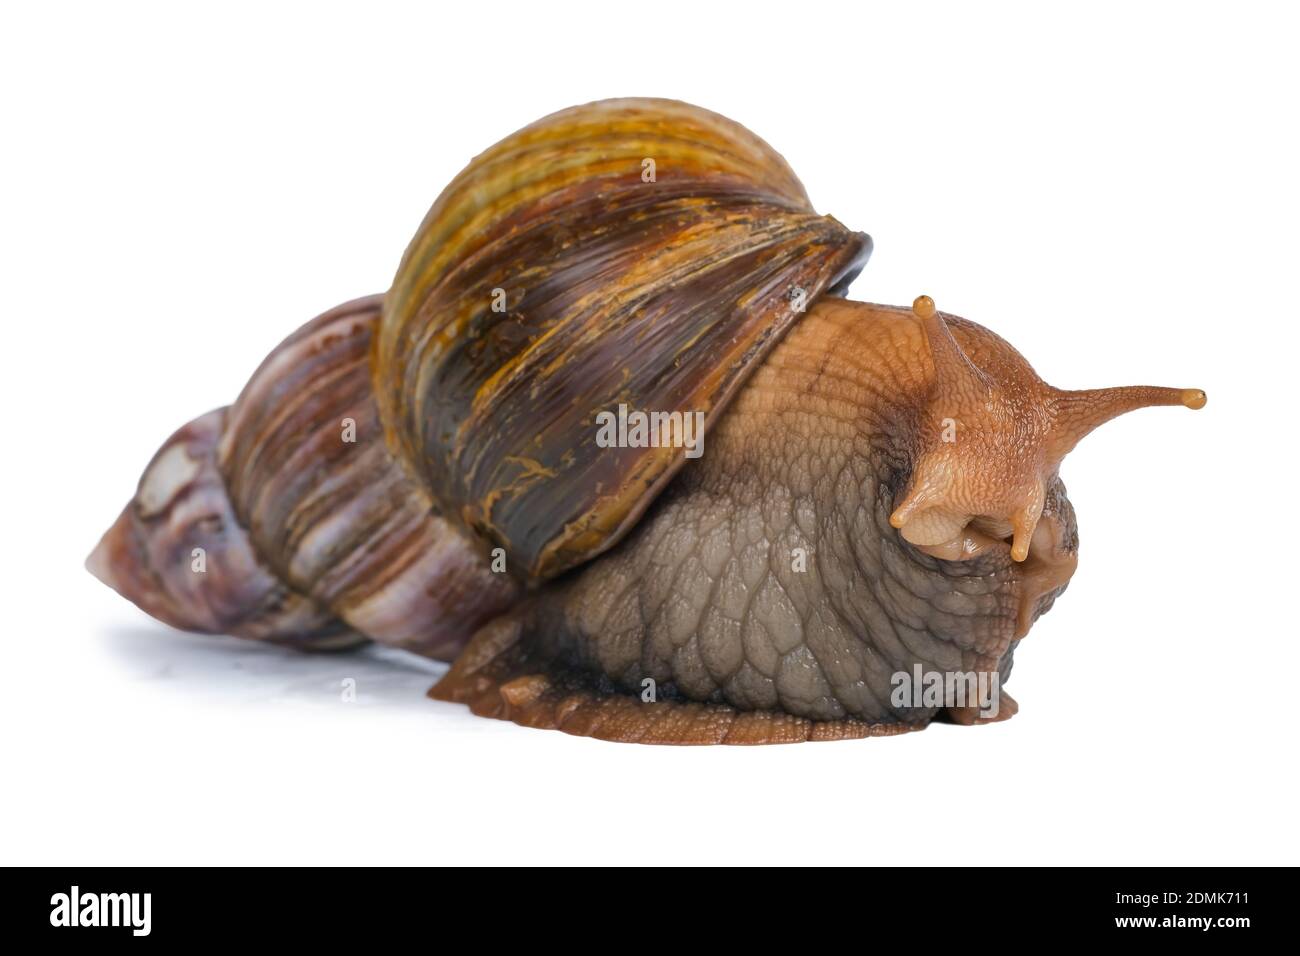 big brown snail goes away and looking to camera isolated on white background.  Stock Photo